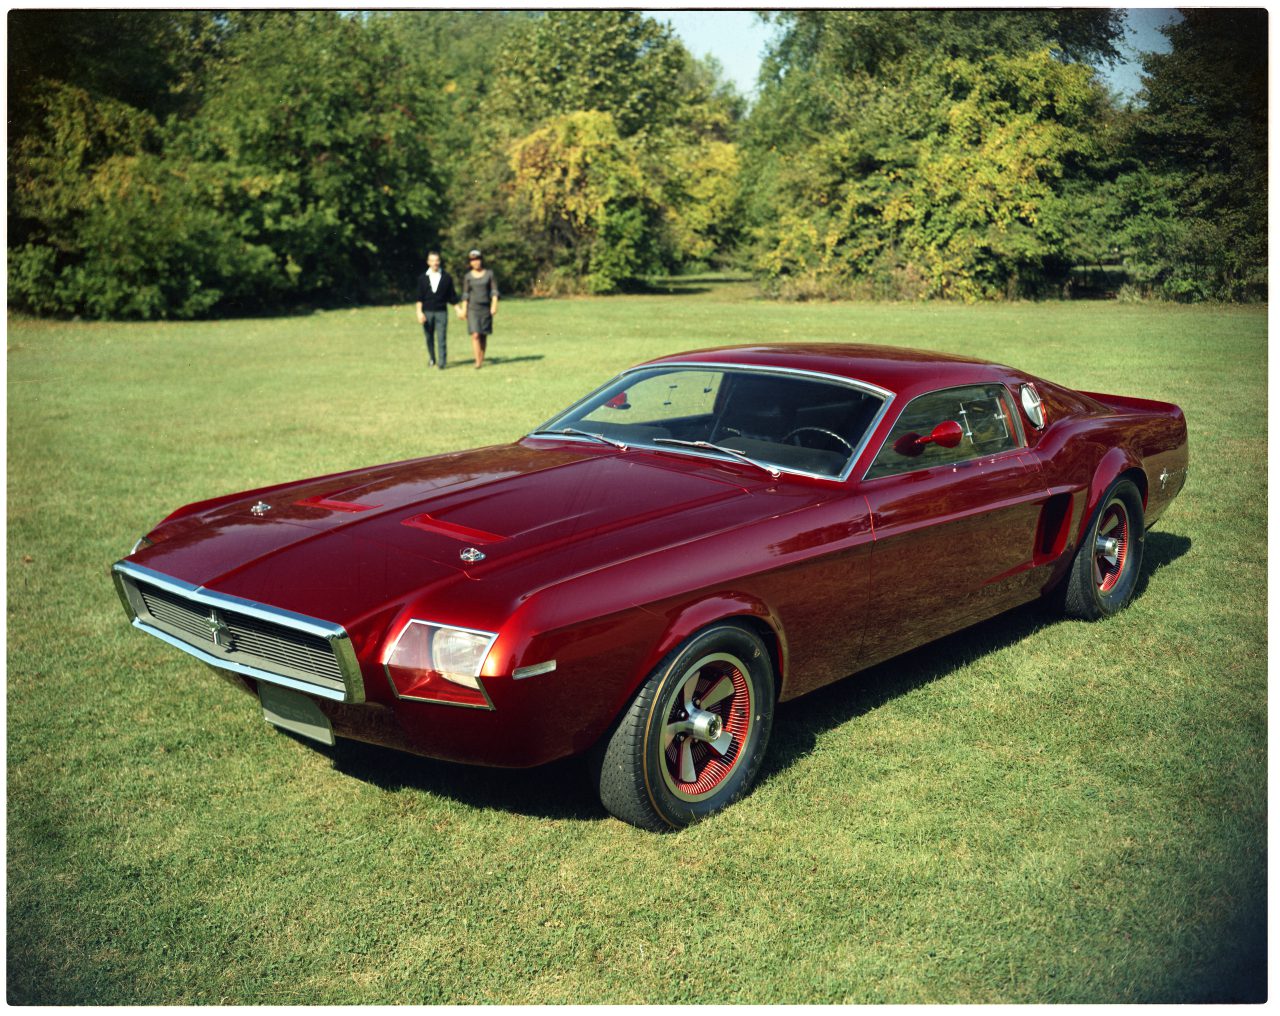 1966 Ford Mustang Mach 1 concept car